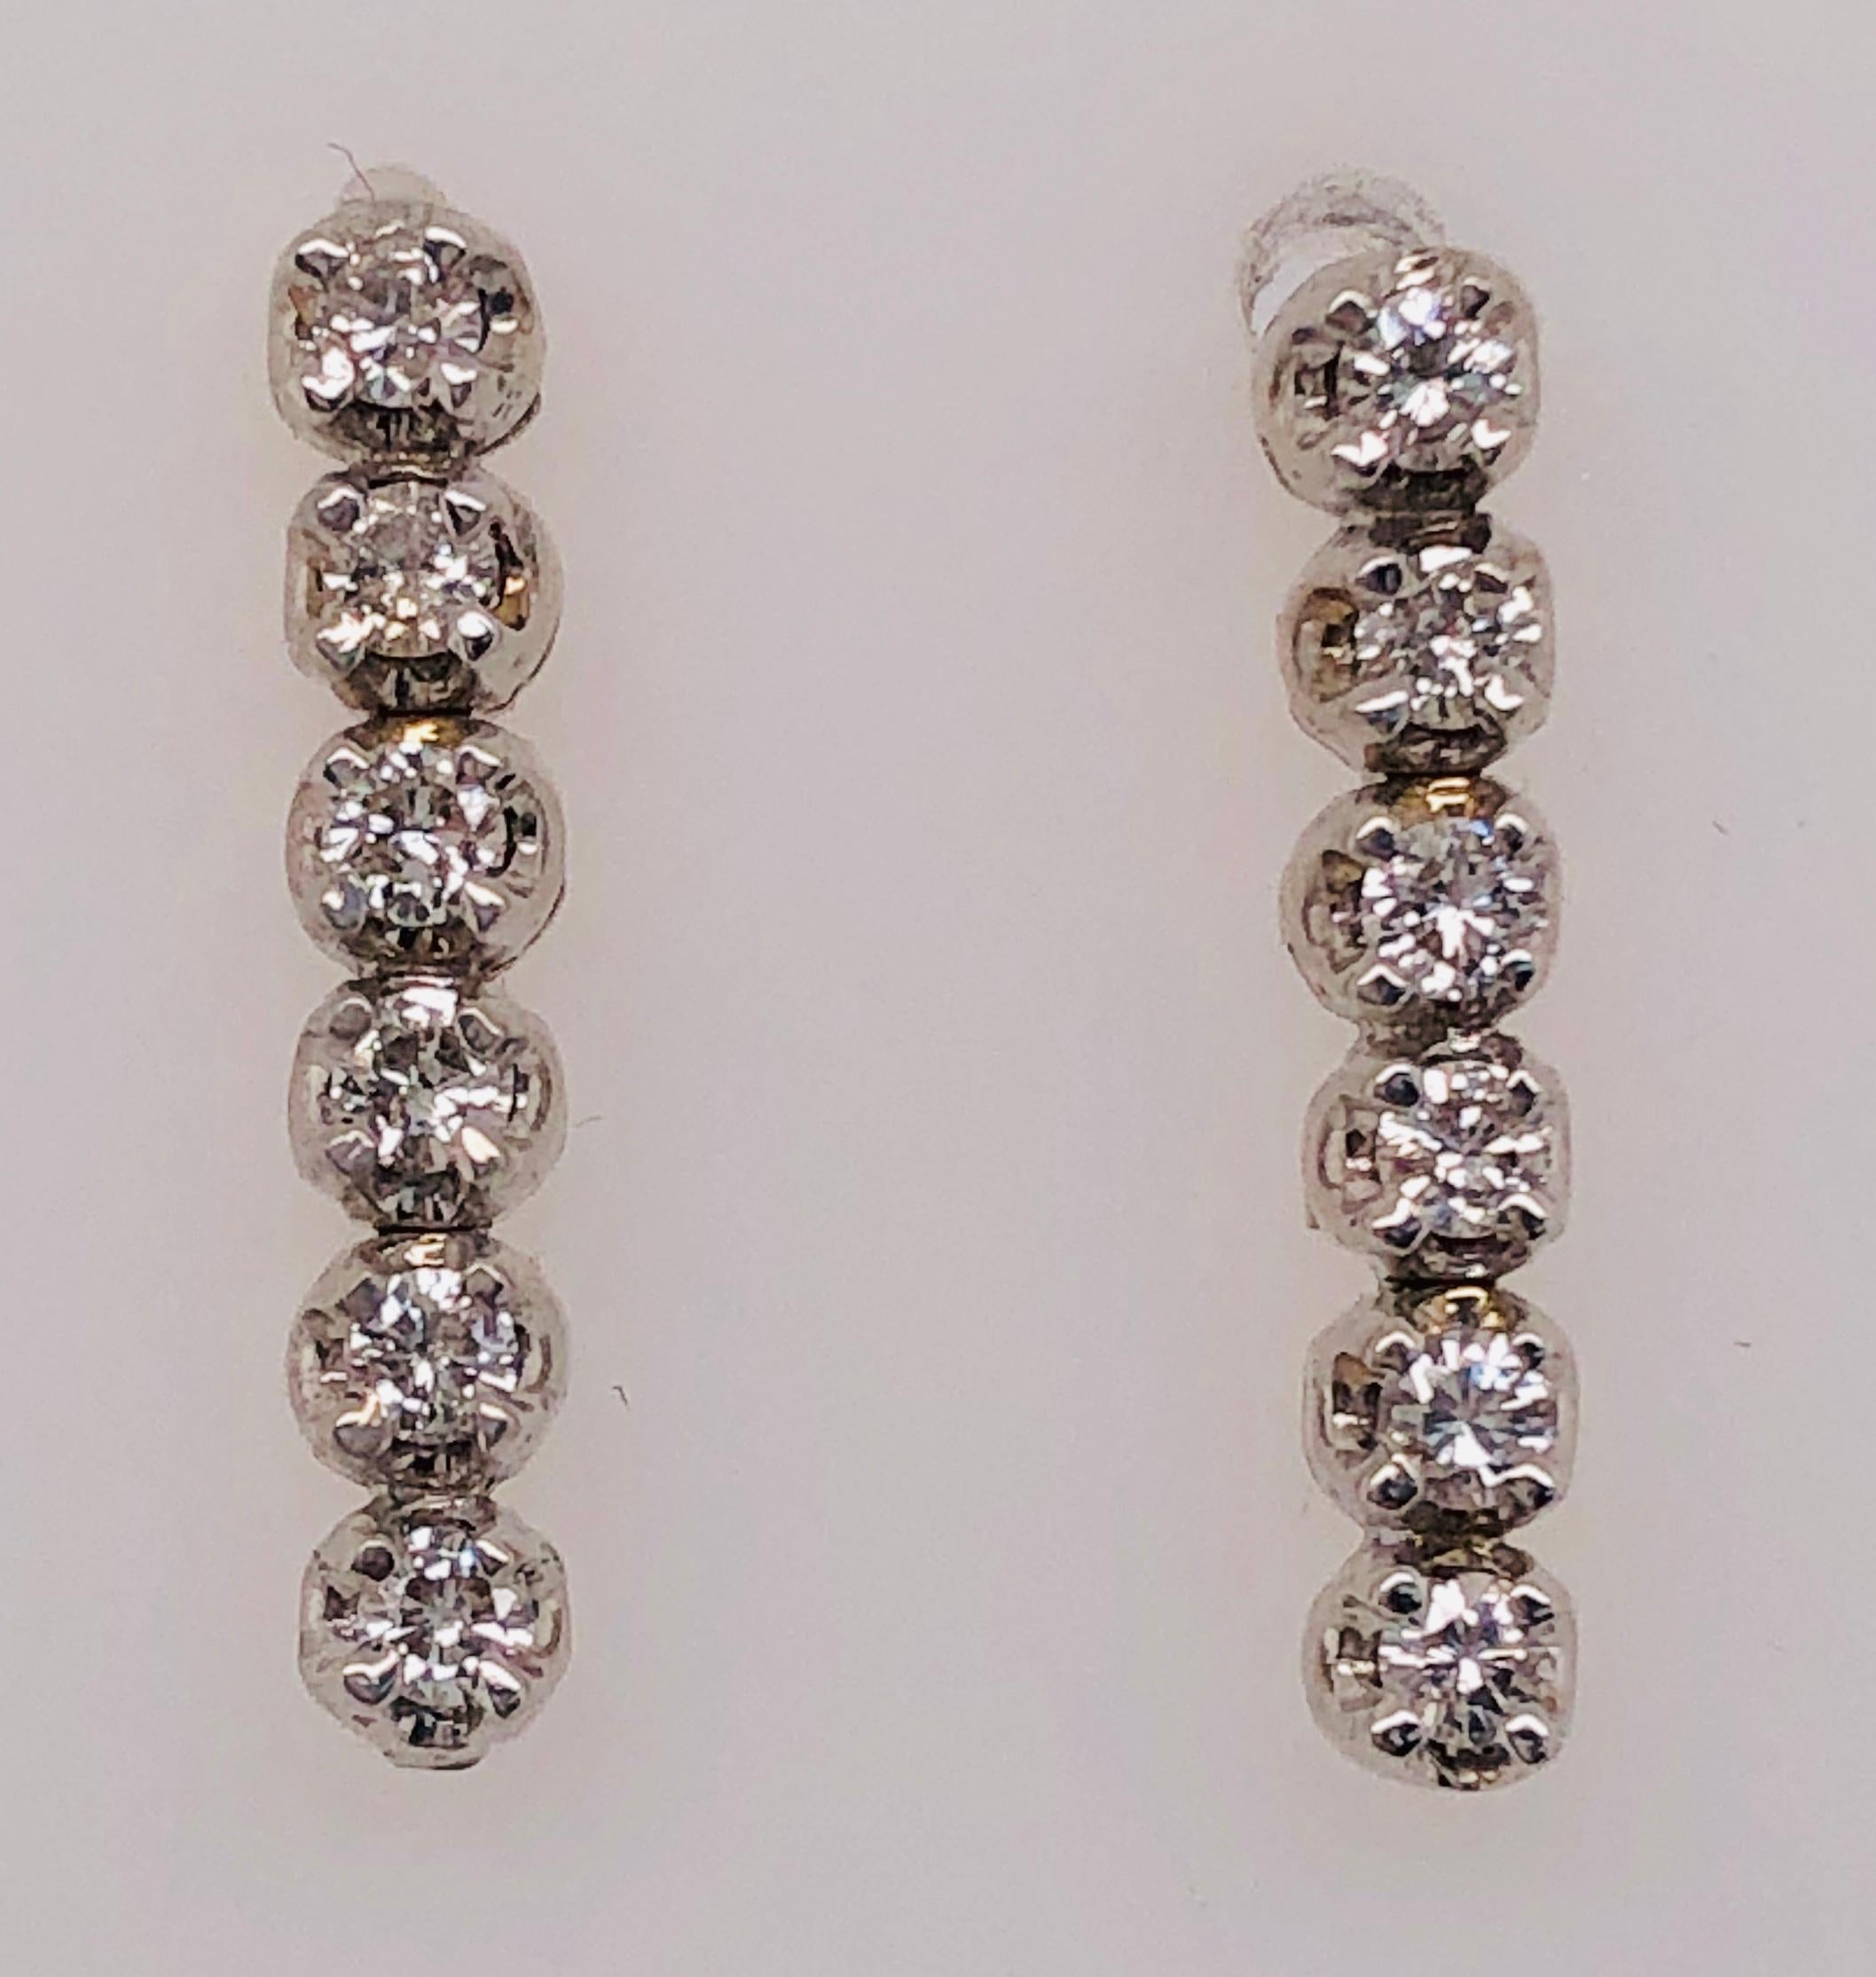 14 Kt White Gold And Diamond Freestyle Drop Earrings 
0.75 Total Diamond Weight
3.18 grams Total Weight.

